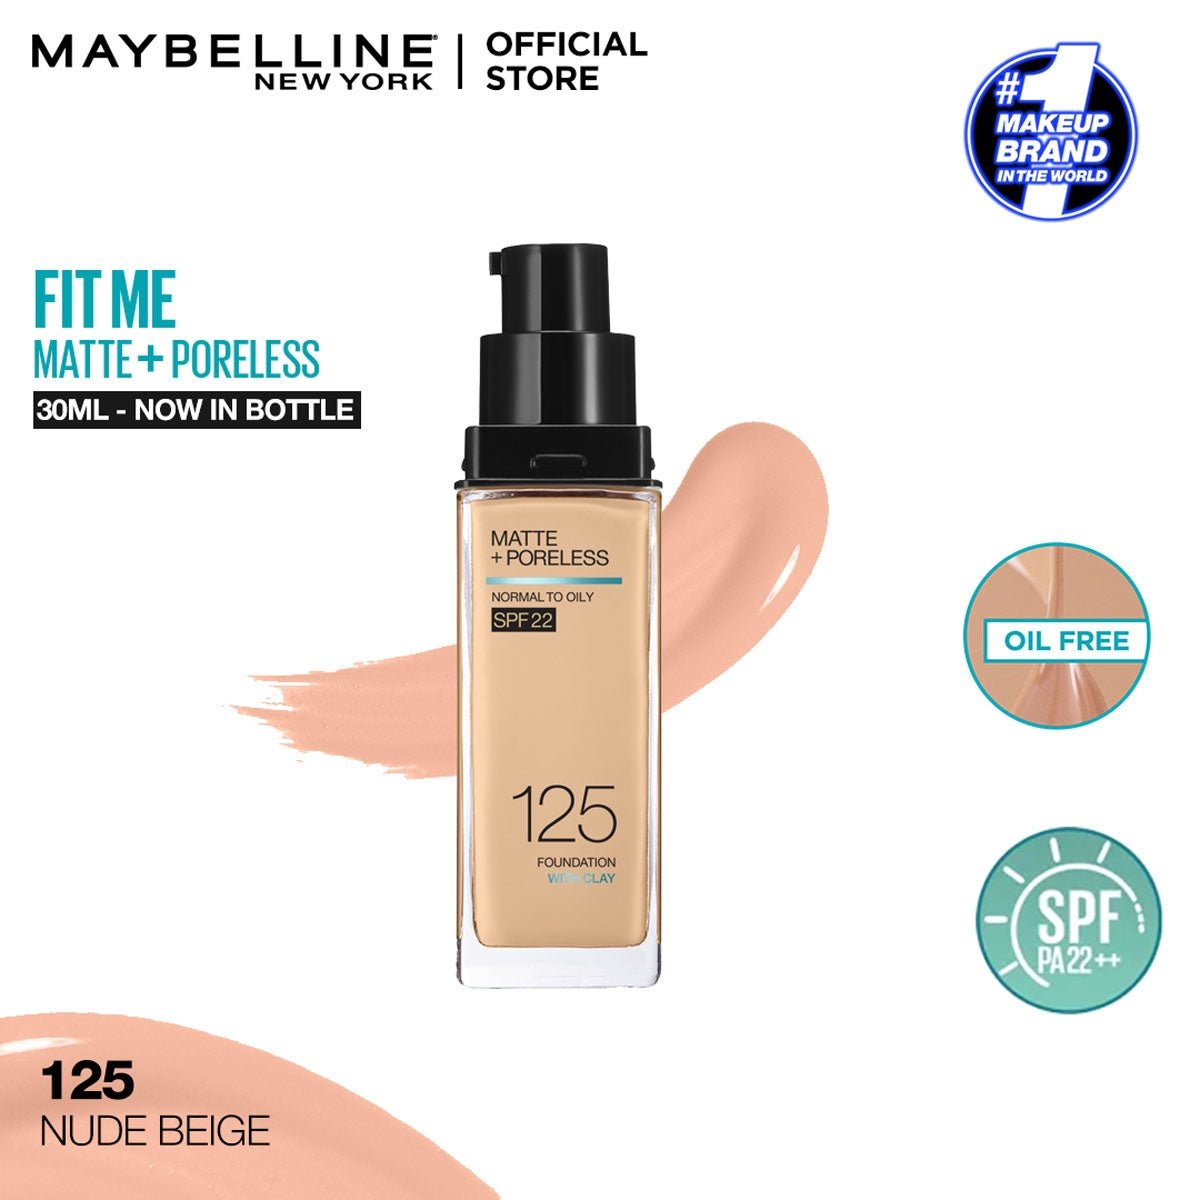 Maybelline Fit Me Matte+Poreless Foundation For Normal to Oily Skin -125 Nude Beige 30Ml - AllurebeautypkMaybelline Fit Me Matte+Poreless Foundation For Normal to Oily Skin -125 Nude Beige 30Ml